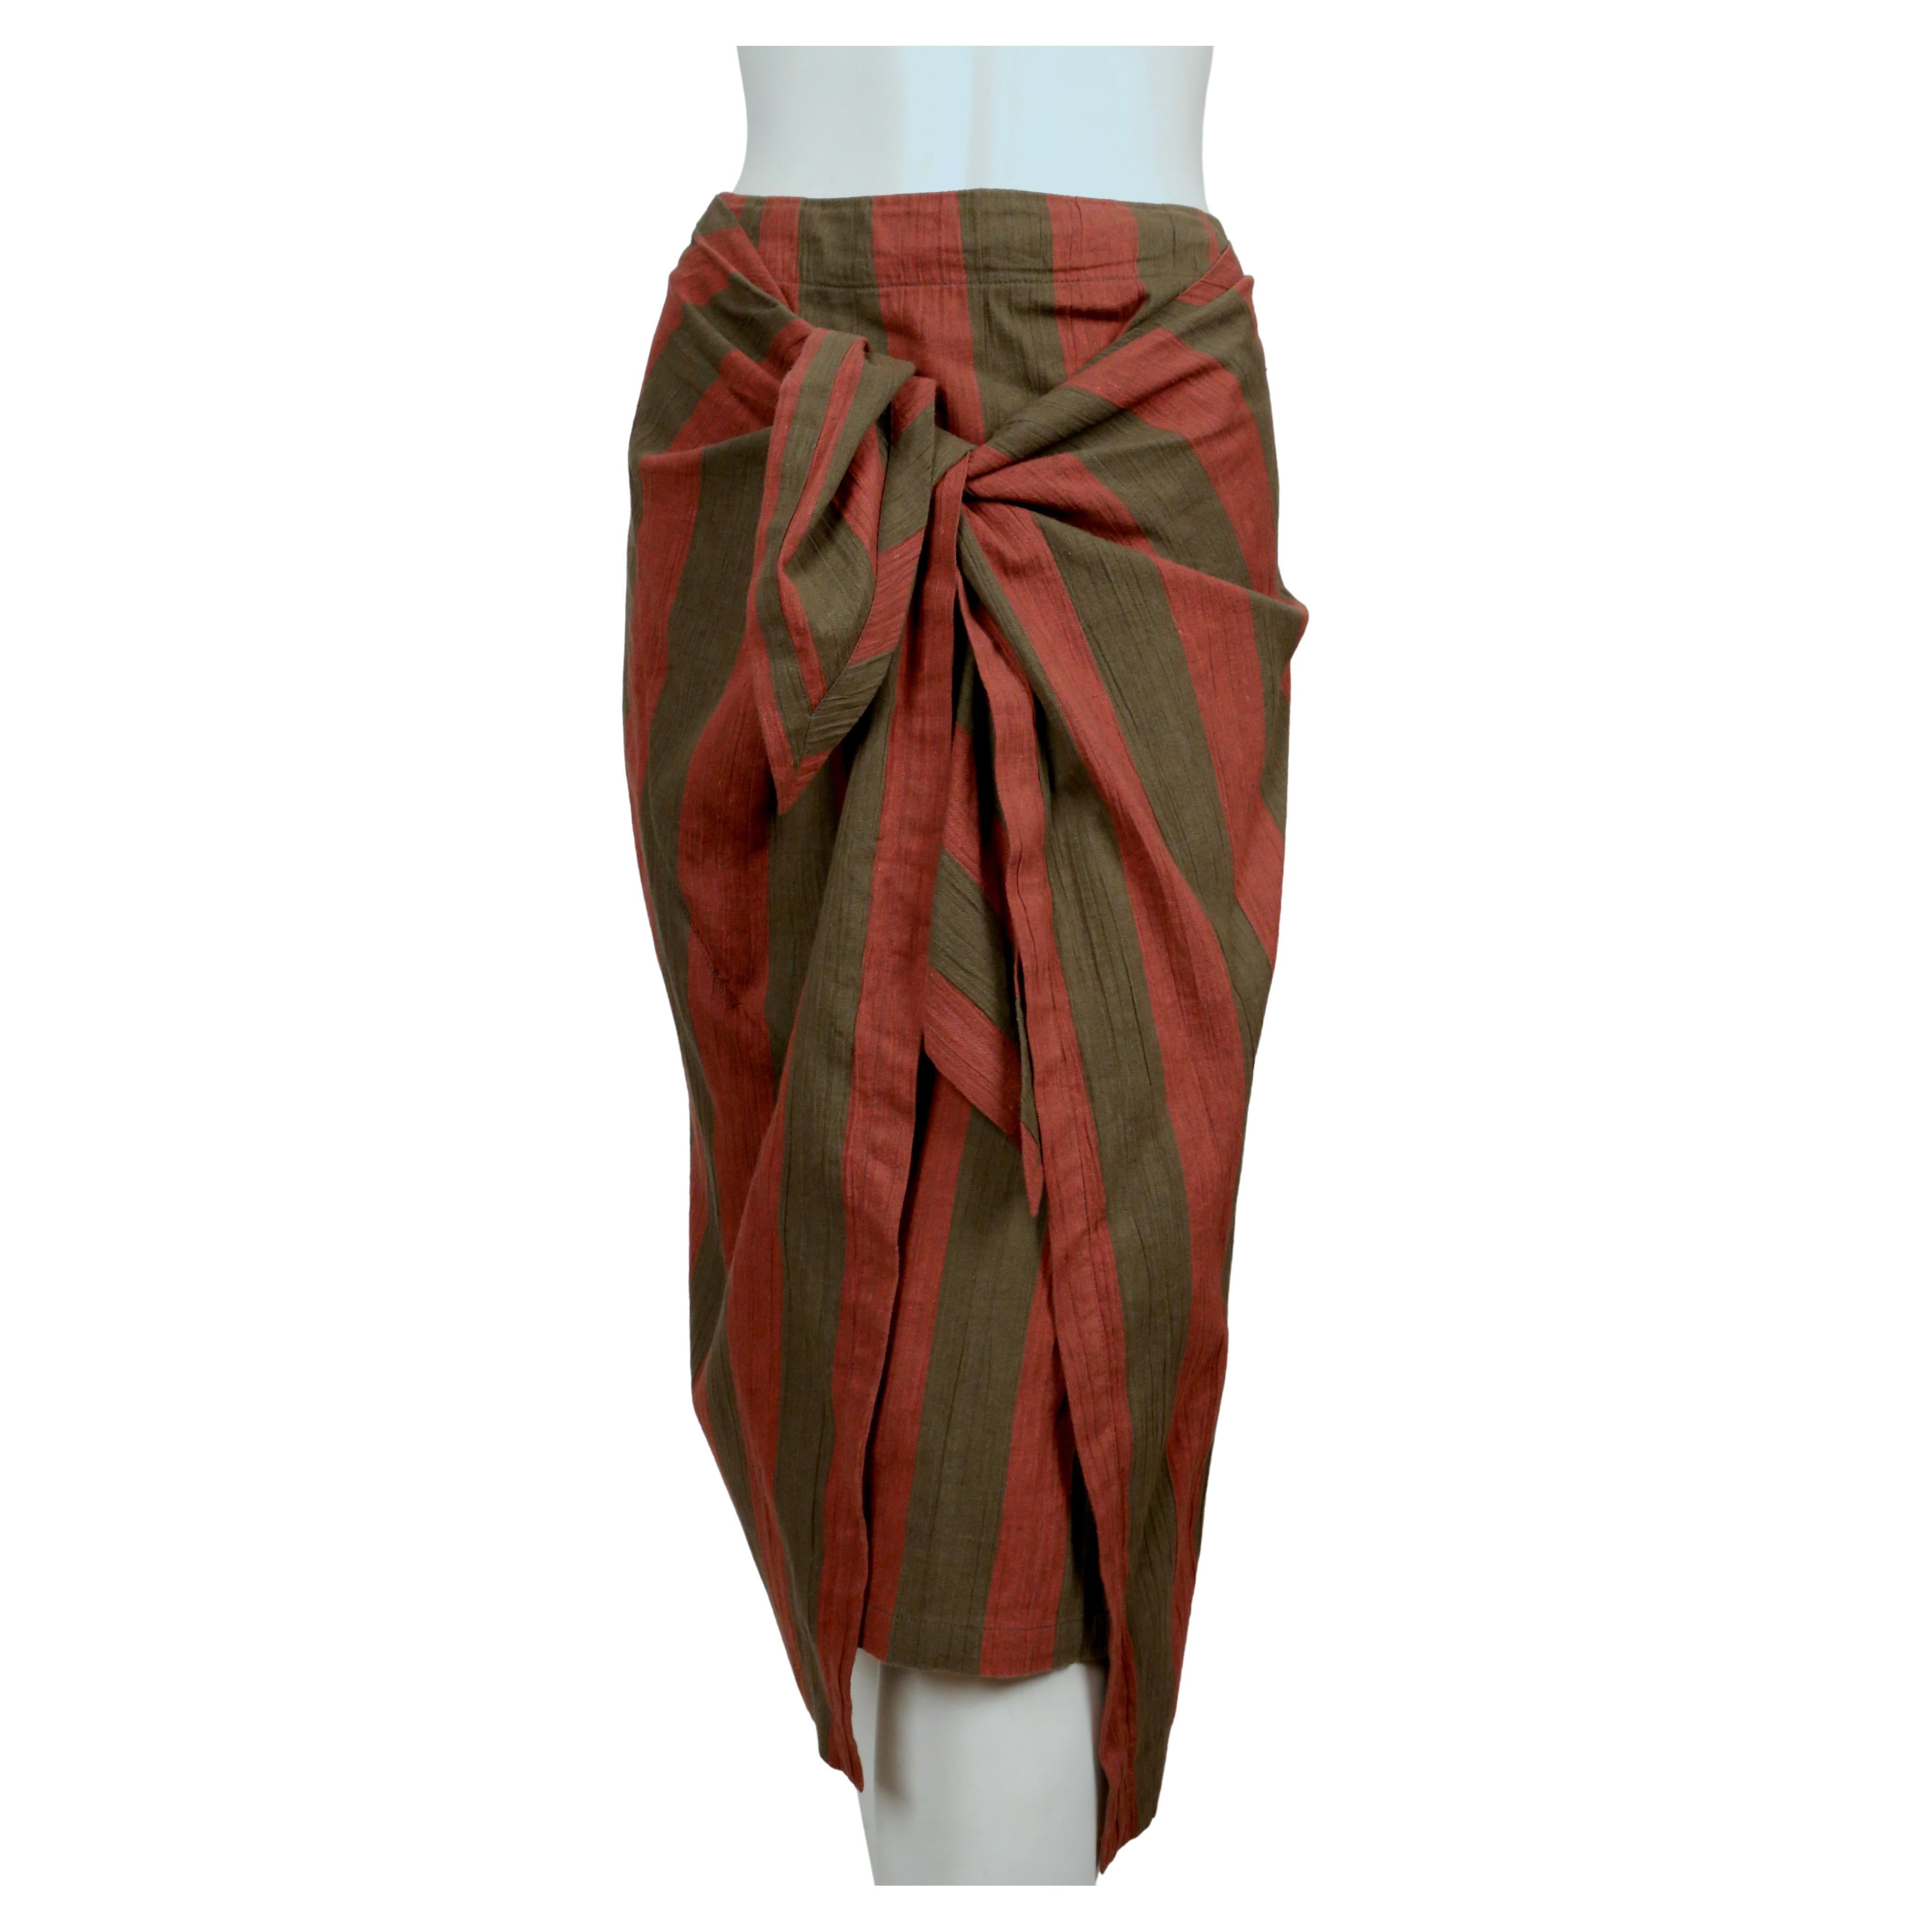 Khaki and terracotta striped skirt with draped closure designed by Issey Miyake dating to the early 1980's.  Labeled a Japanese size '9'.  The skirt measures approximately 28